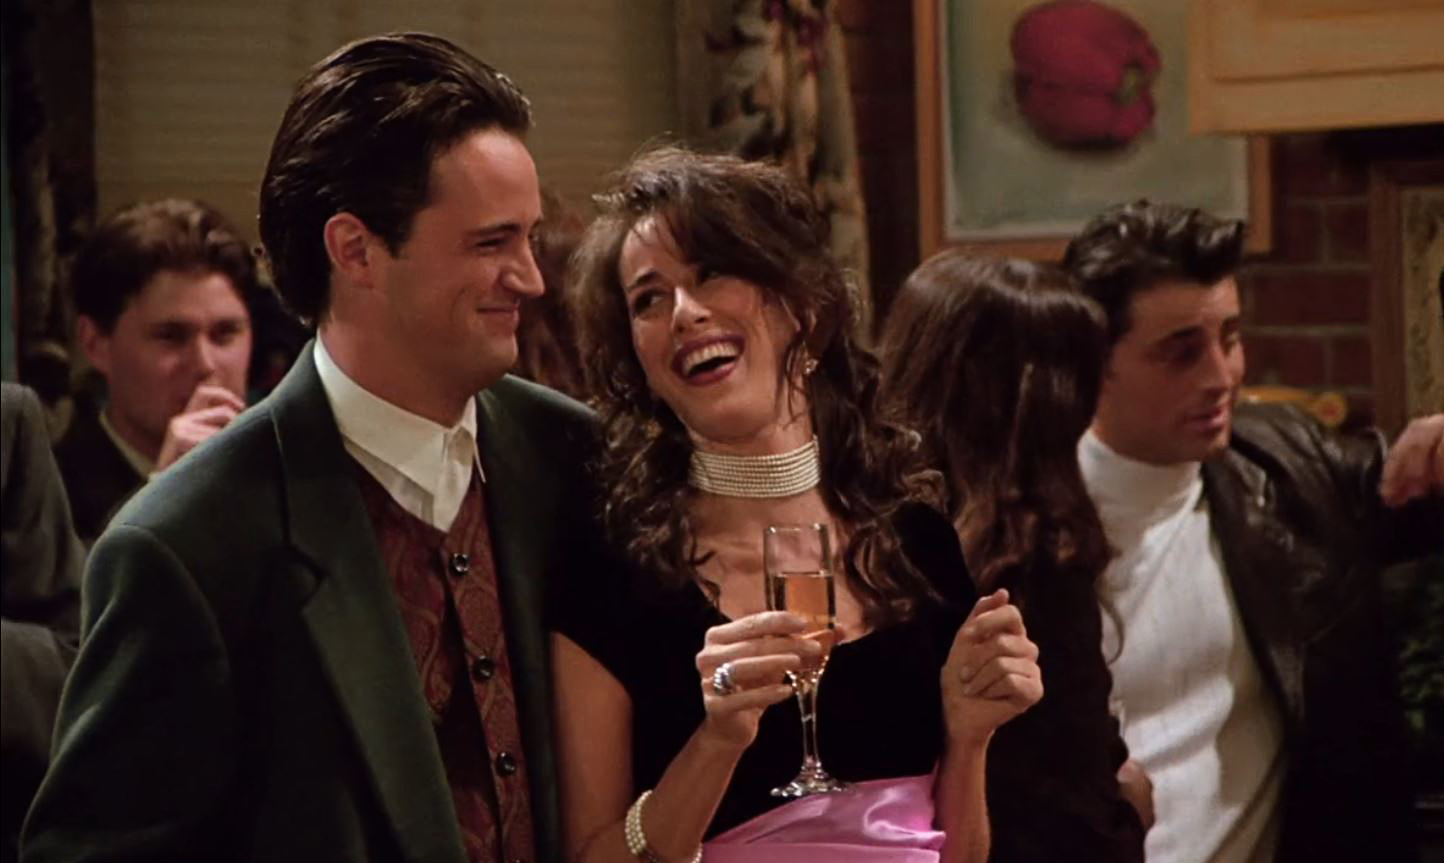 Friends' Maggie Wheeler Mourns Matthew Perry: 'Very Blessed by Every Creative Moment We Shared'